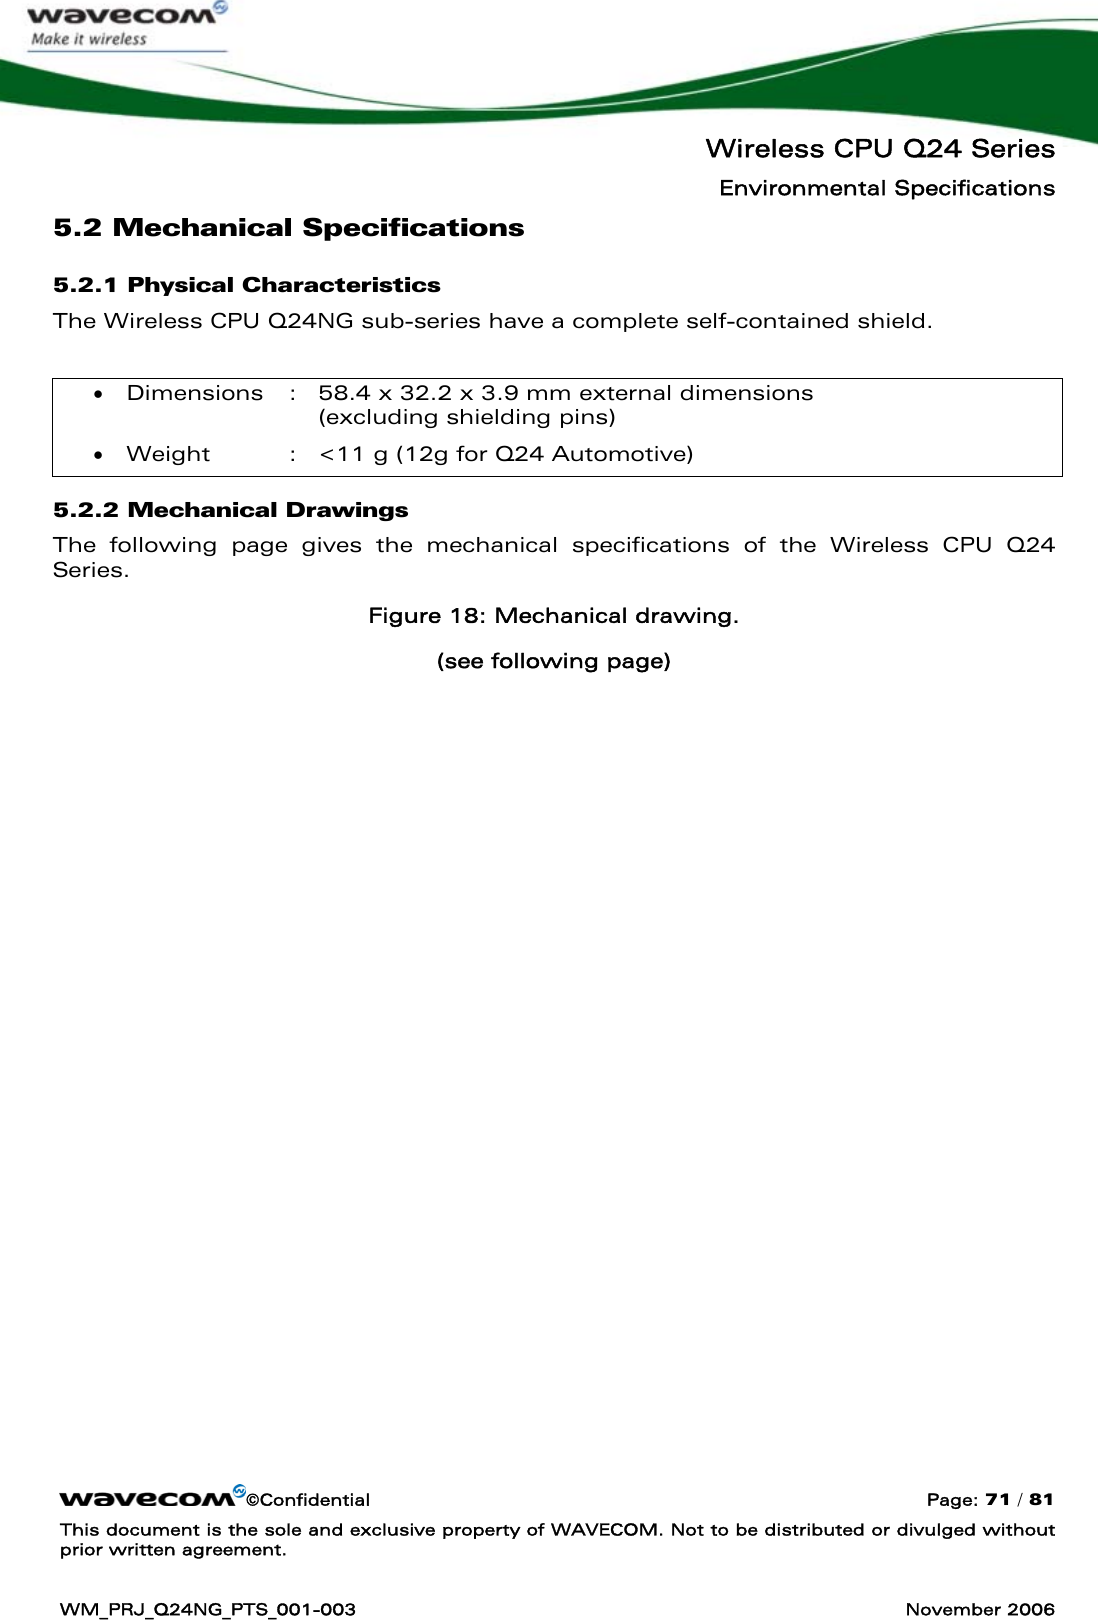   Wireless CPU Q24 Series Environmental Specifications ©Confidential  Page: 71 / 81 This document is the sole and exclusive property of WAVECOM. Not to be distributed or divulged without prior written agreement.  WM_PRJ_Q24NG_PTS_001-003  November 2006  5.2 Mechanical Specifications 5.2.1 Physical Characteristics The Wireless CPU Q24NG sub-series have a complete self-contained shield.  • Dimensions  :  58.4 x 32.2 x 3.9 mm external dimensions  (excluding shielding pins) • Weight  :  &lt;11 g (12g for Q24 Automotive) 5.2.2 Mechanical Drawings The following page gives the mechanical specifications of the Wireless CPU Q24 Series. Figure 18: Mechanical drawing. (see following page)   